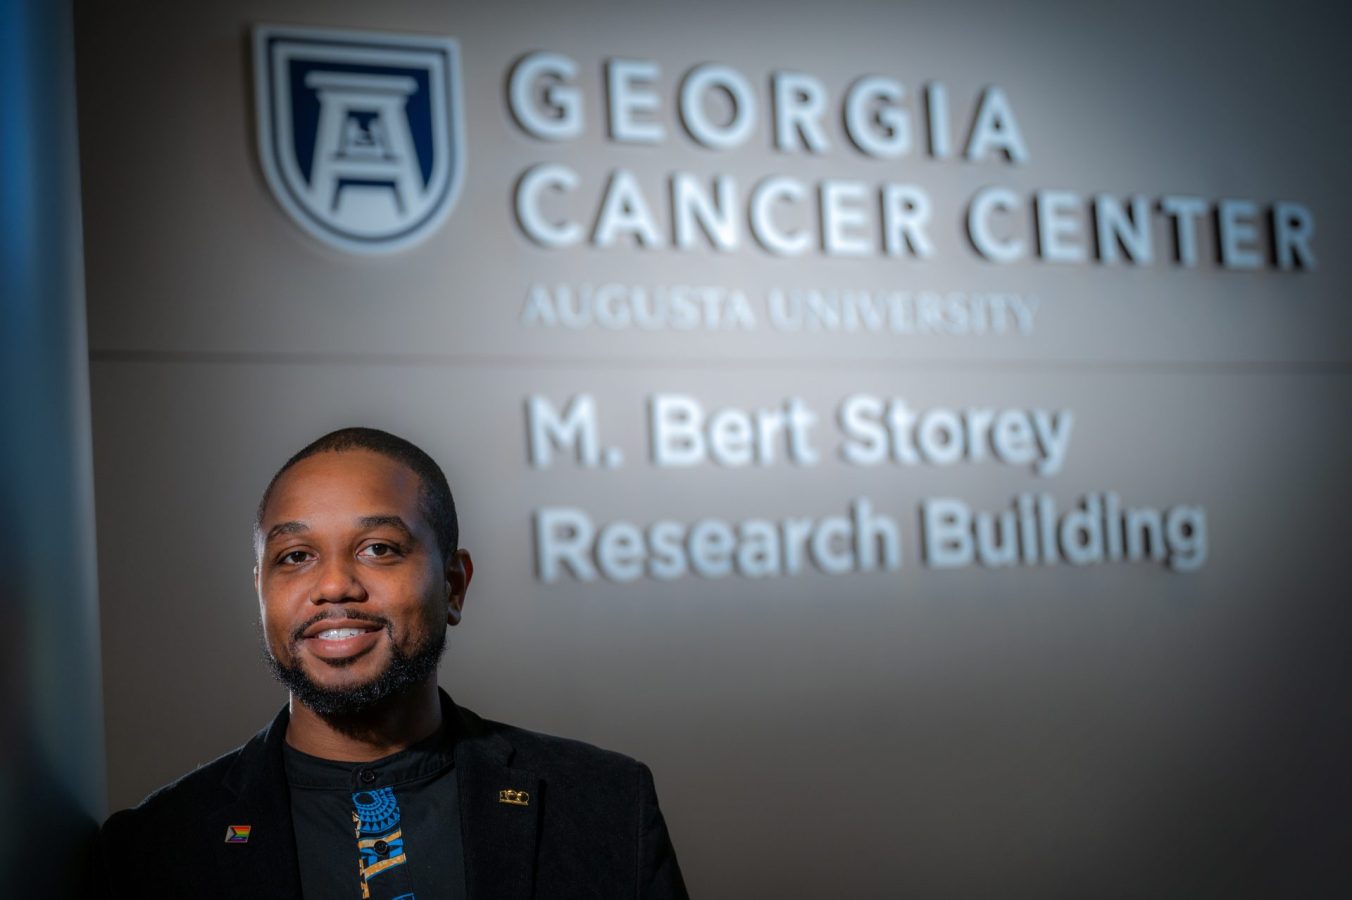 Man in black coat and blue and black shirt stands in front of sign that reads "Georgia Cancer Center"